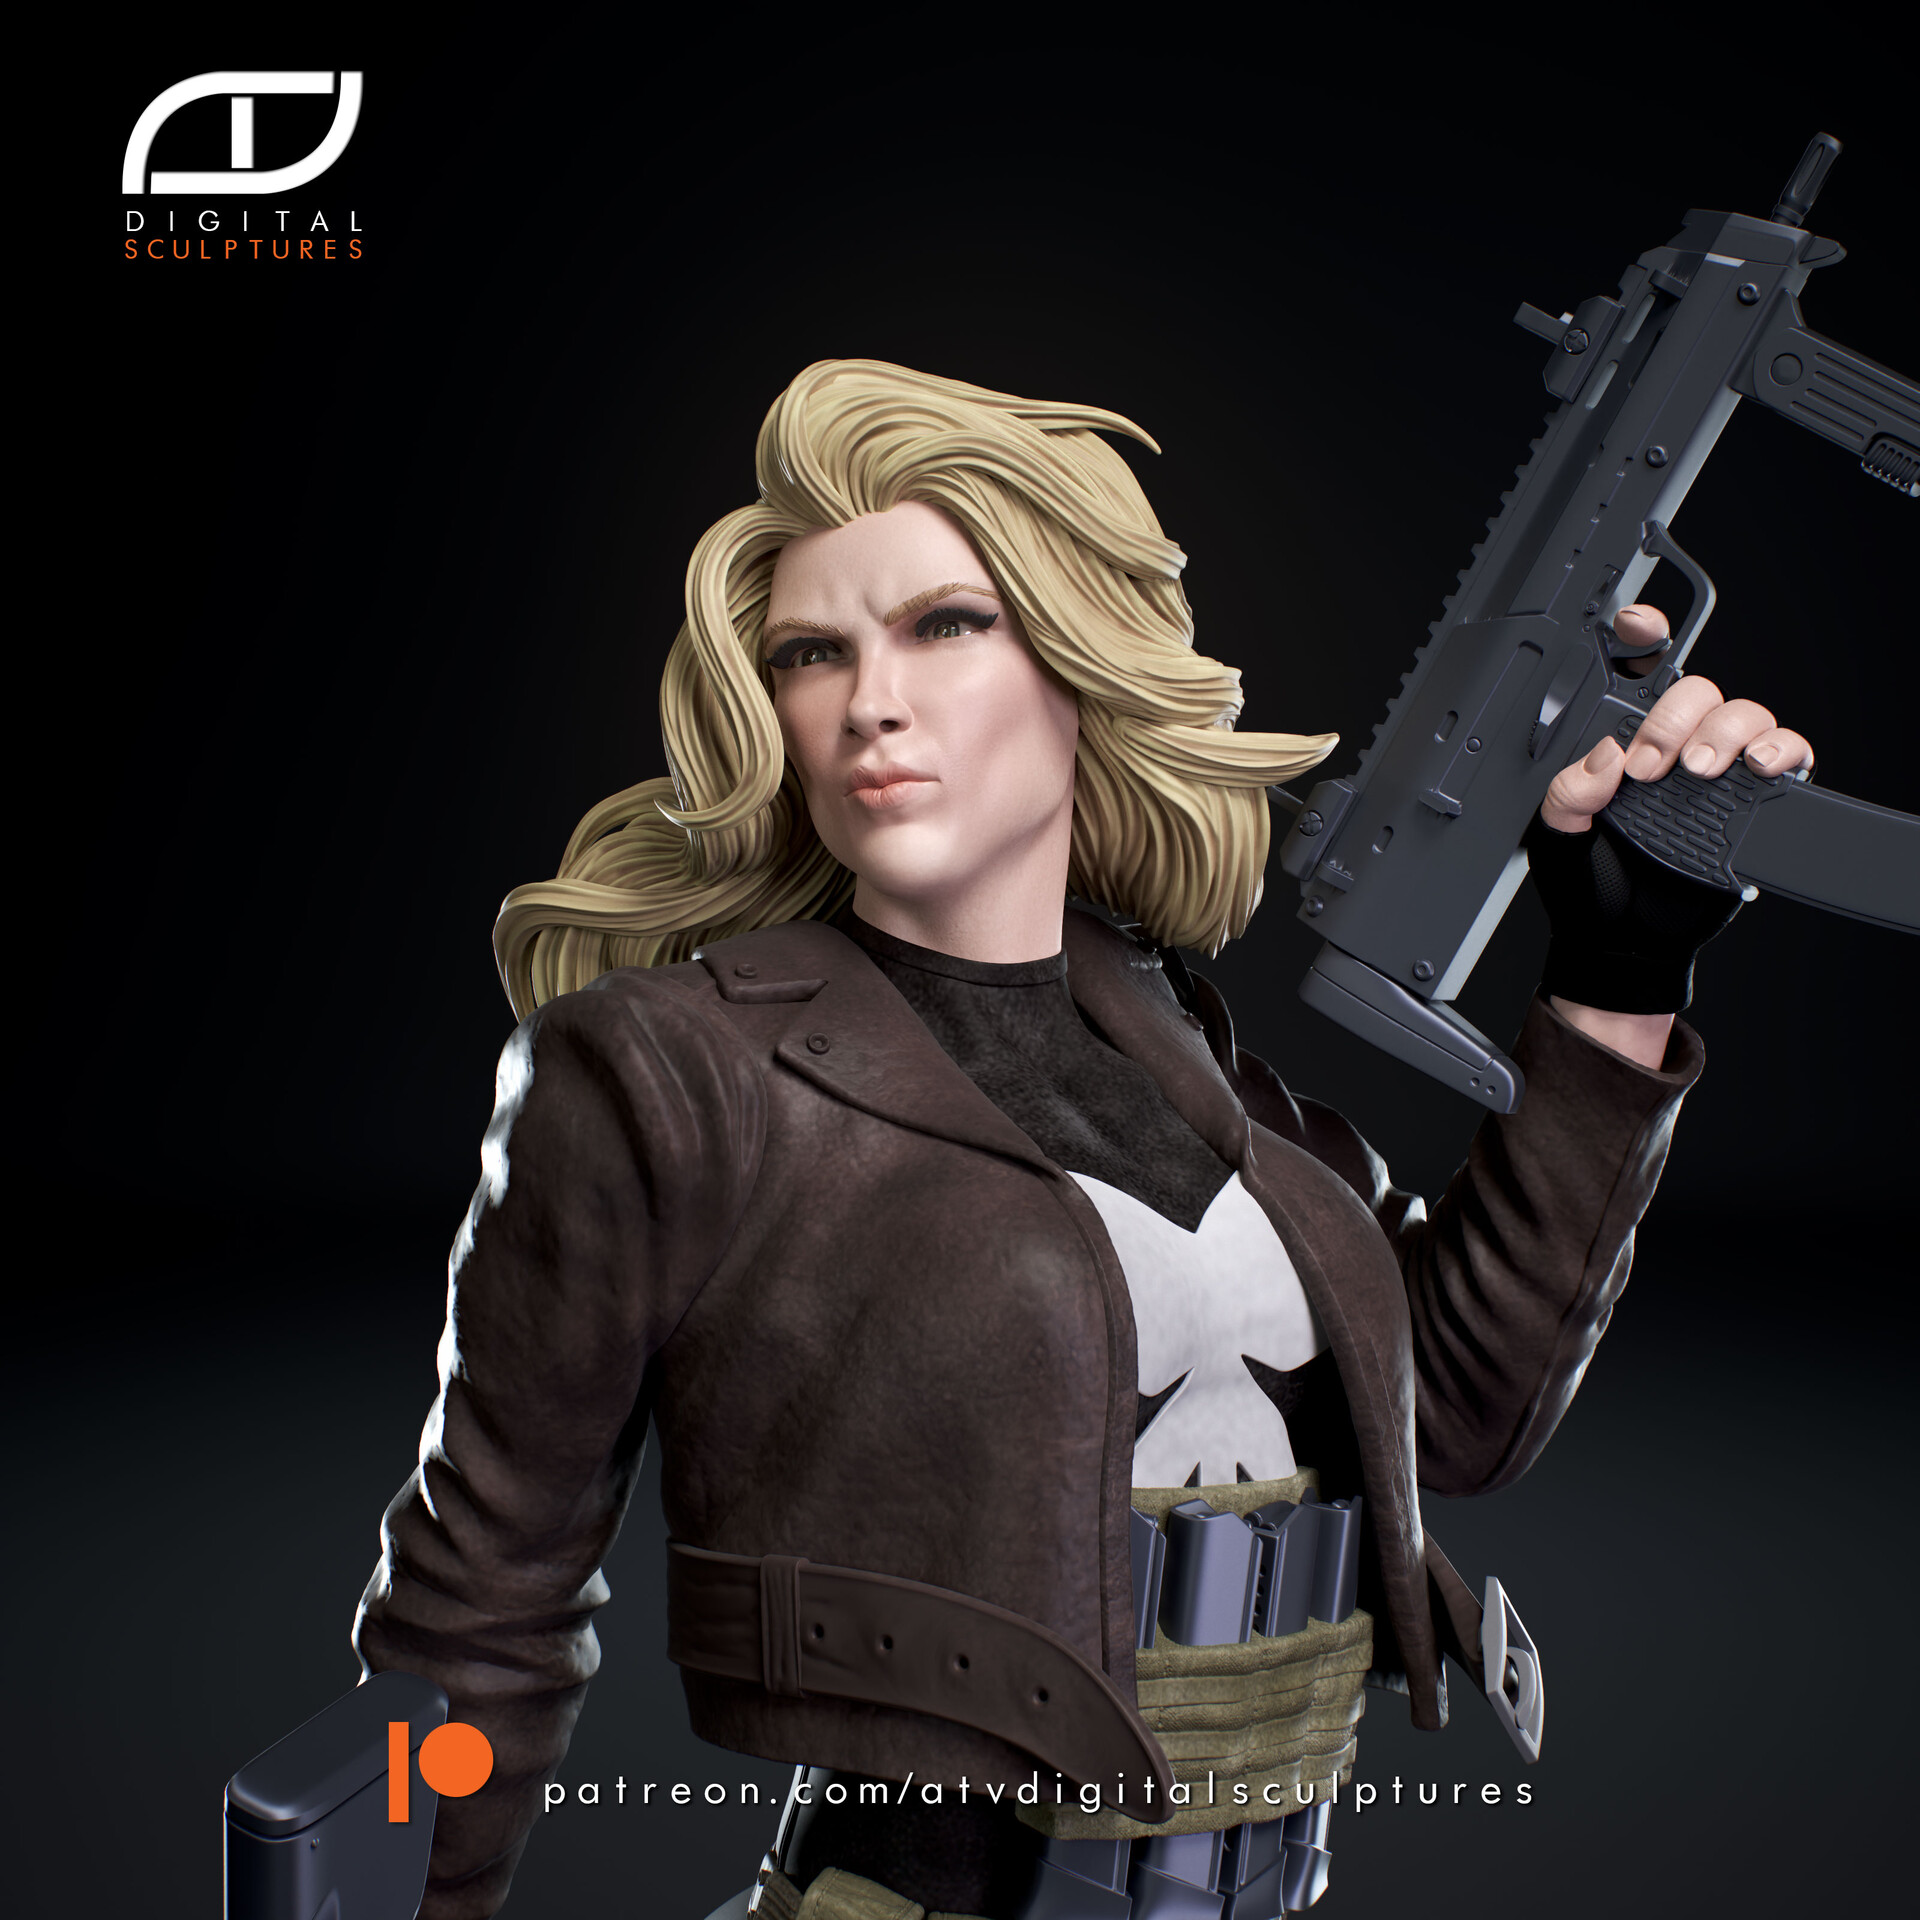 Made an original character inspired by Black Widow, Lady Punisher